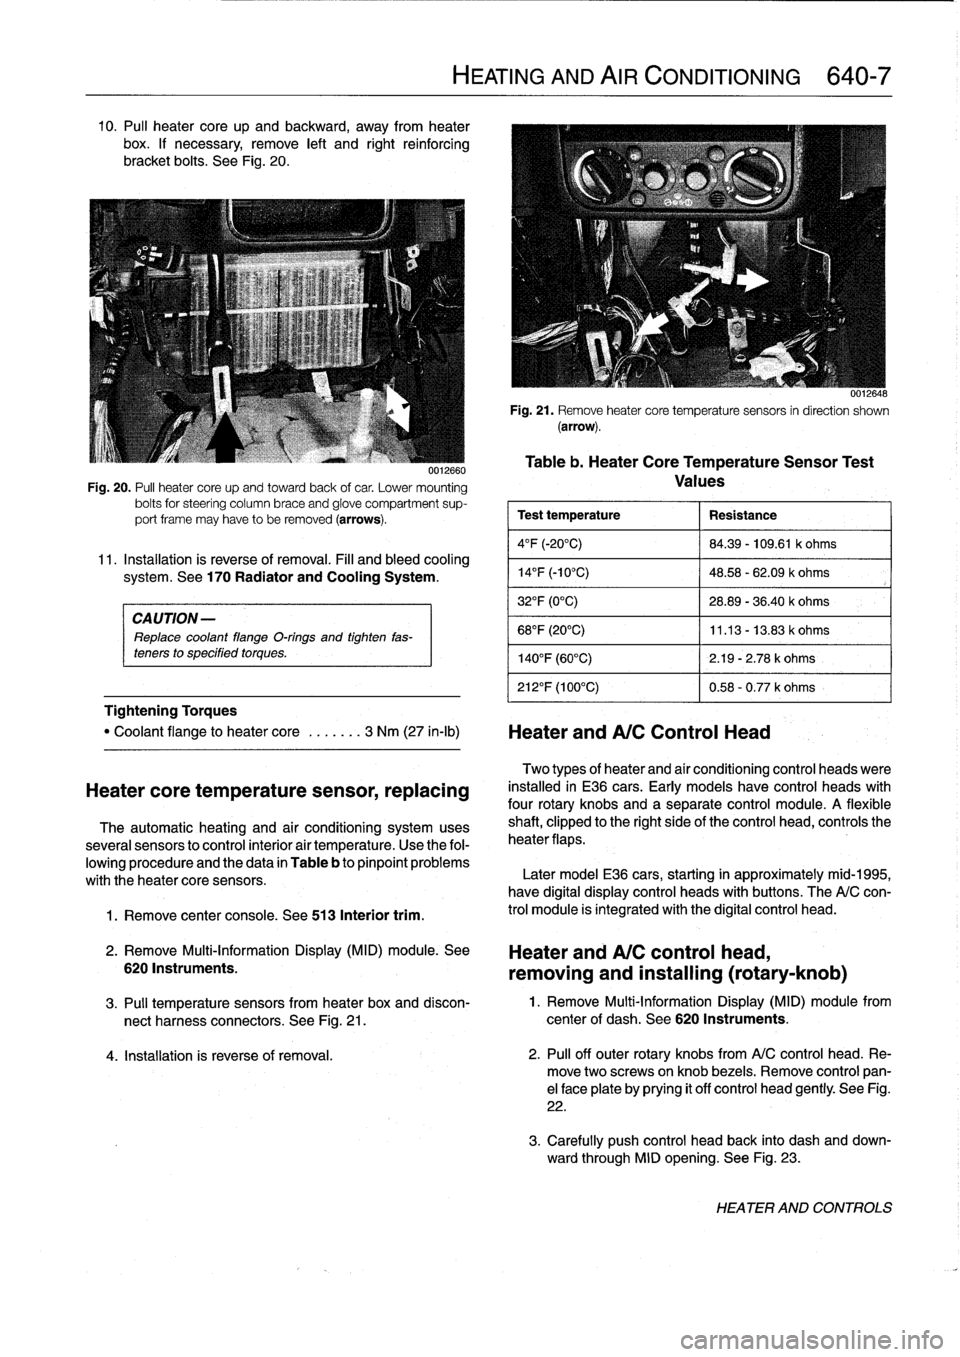 BMW 318i 1997 E36 Owners Guide 10
.
Pul¡
heater
core
up
and
backward,
away
from
heater
box
.
If
necessary,
remove
left
and
right
reinforcing
bracket
bolts
.
See
Fig
.
20
.

CAUTION-

Replace
coolant
flange
O-rings
and
tighten
fas-